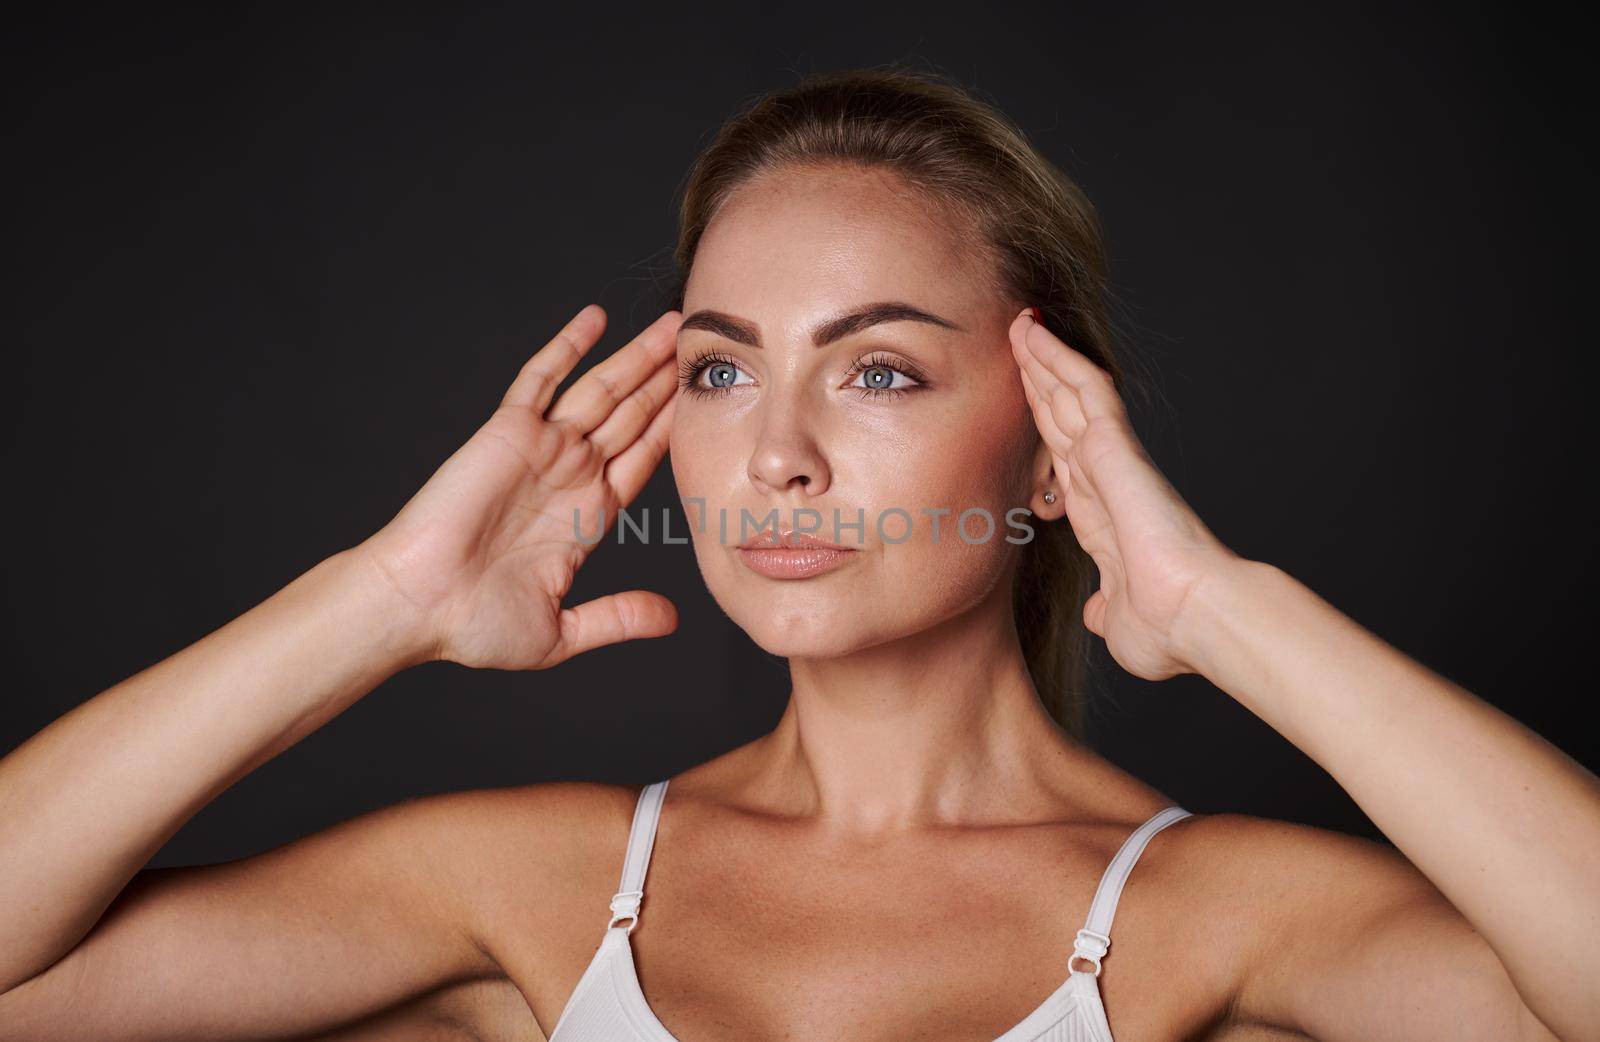 Close-up portrait of an European pretty woman with fresh glowing skin holding hands on her temples, doing massage movements on her face. Anti-aging concept, smoothing, rejuvenating beauty treatment by artgf